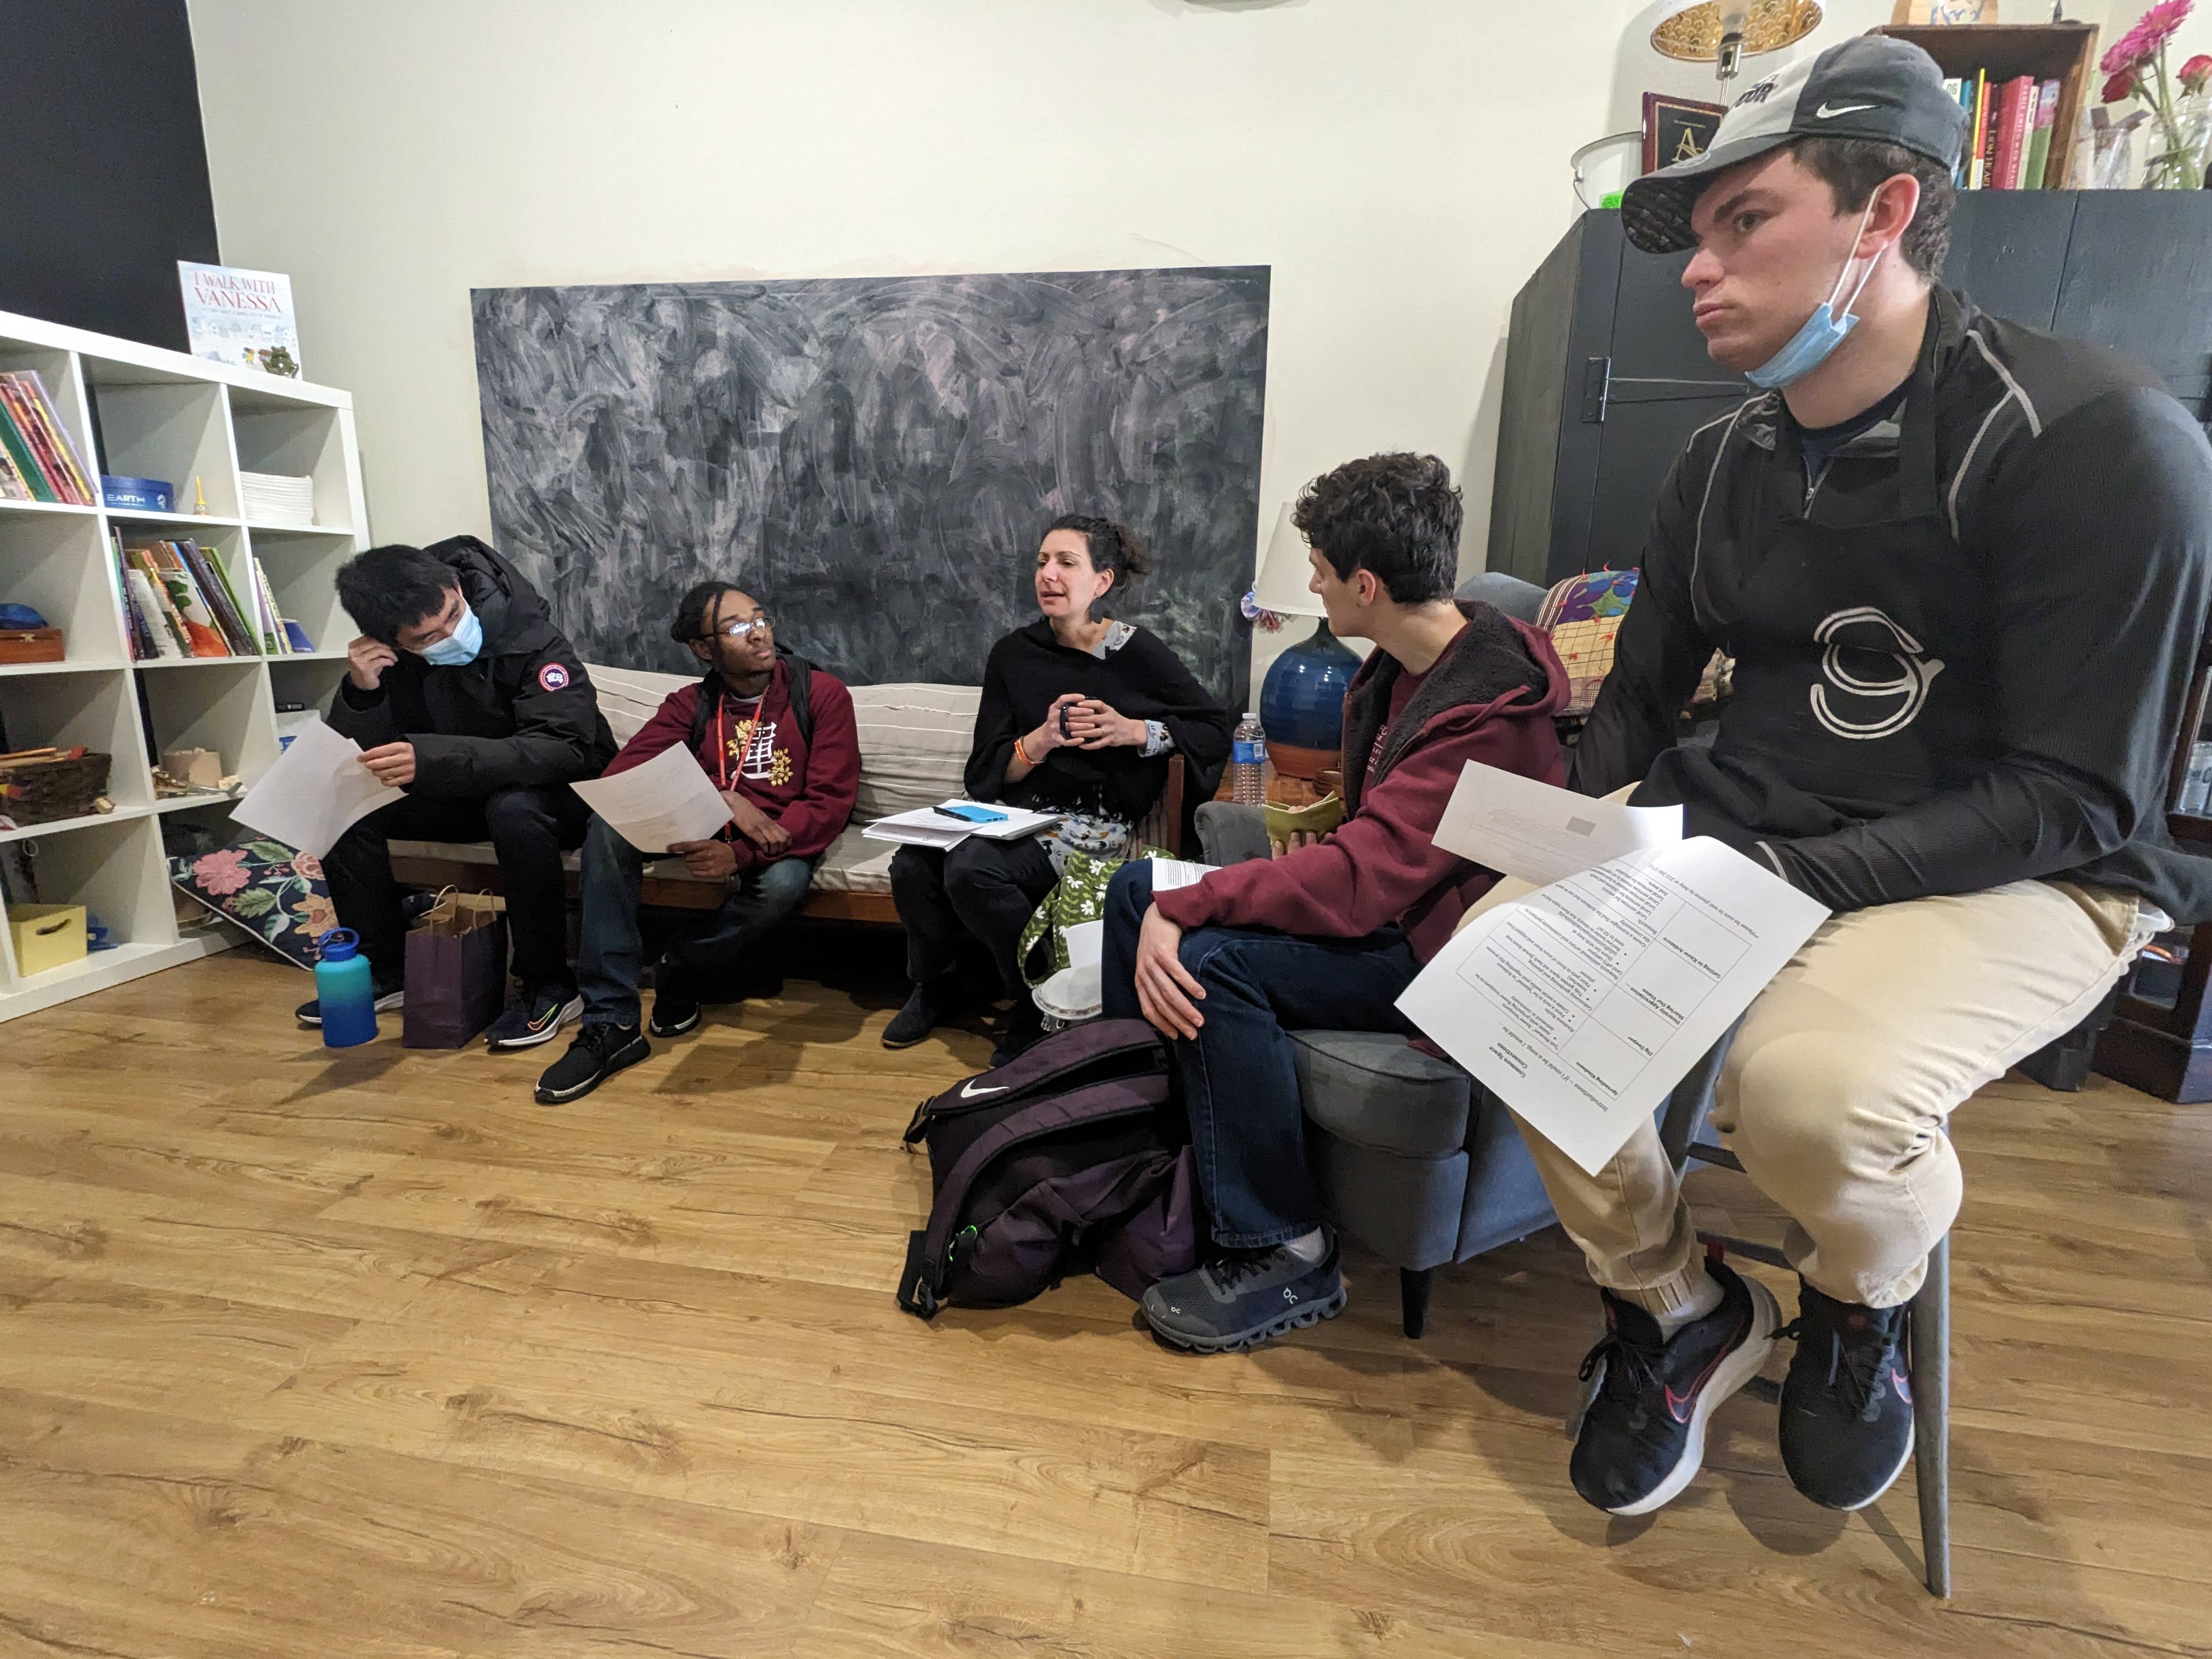 Students meet at Common Space in Ardmore